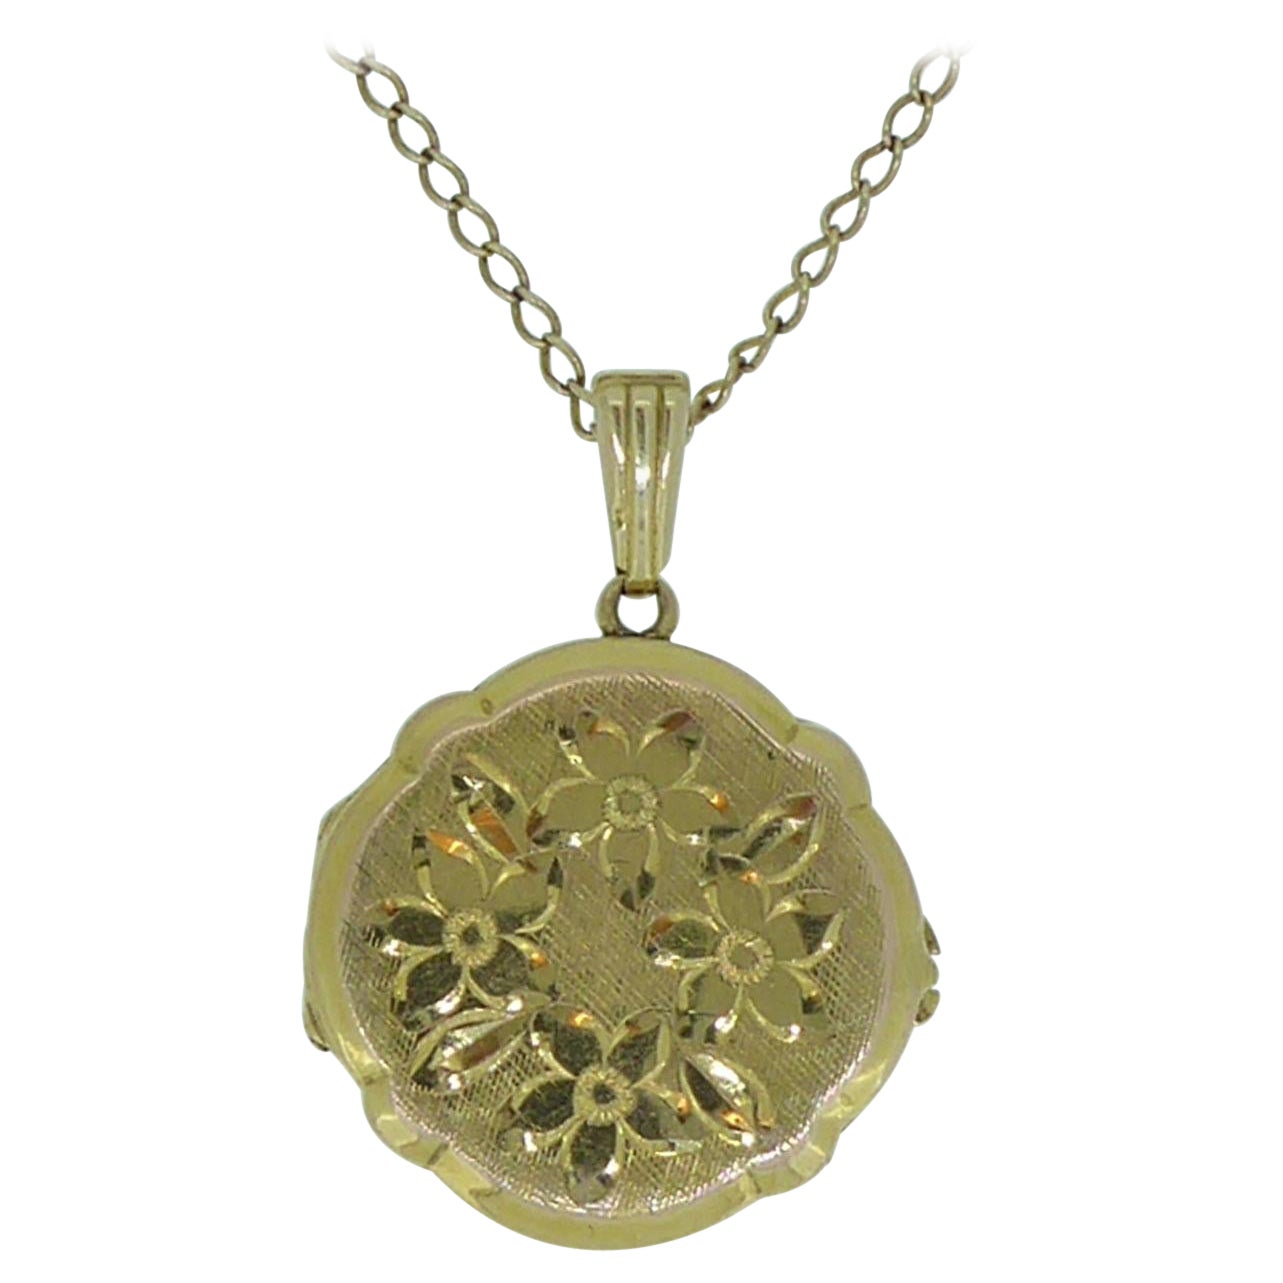 Vintage Round Gold Locket with Floral Engraving, Yellow Gold